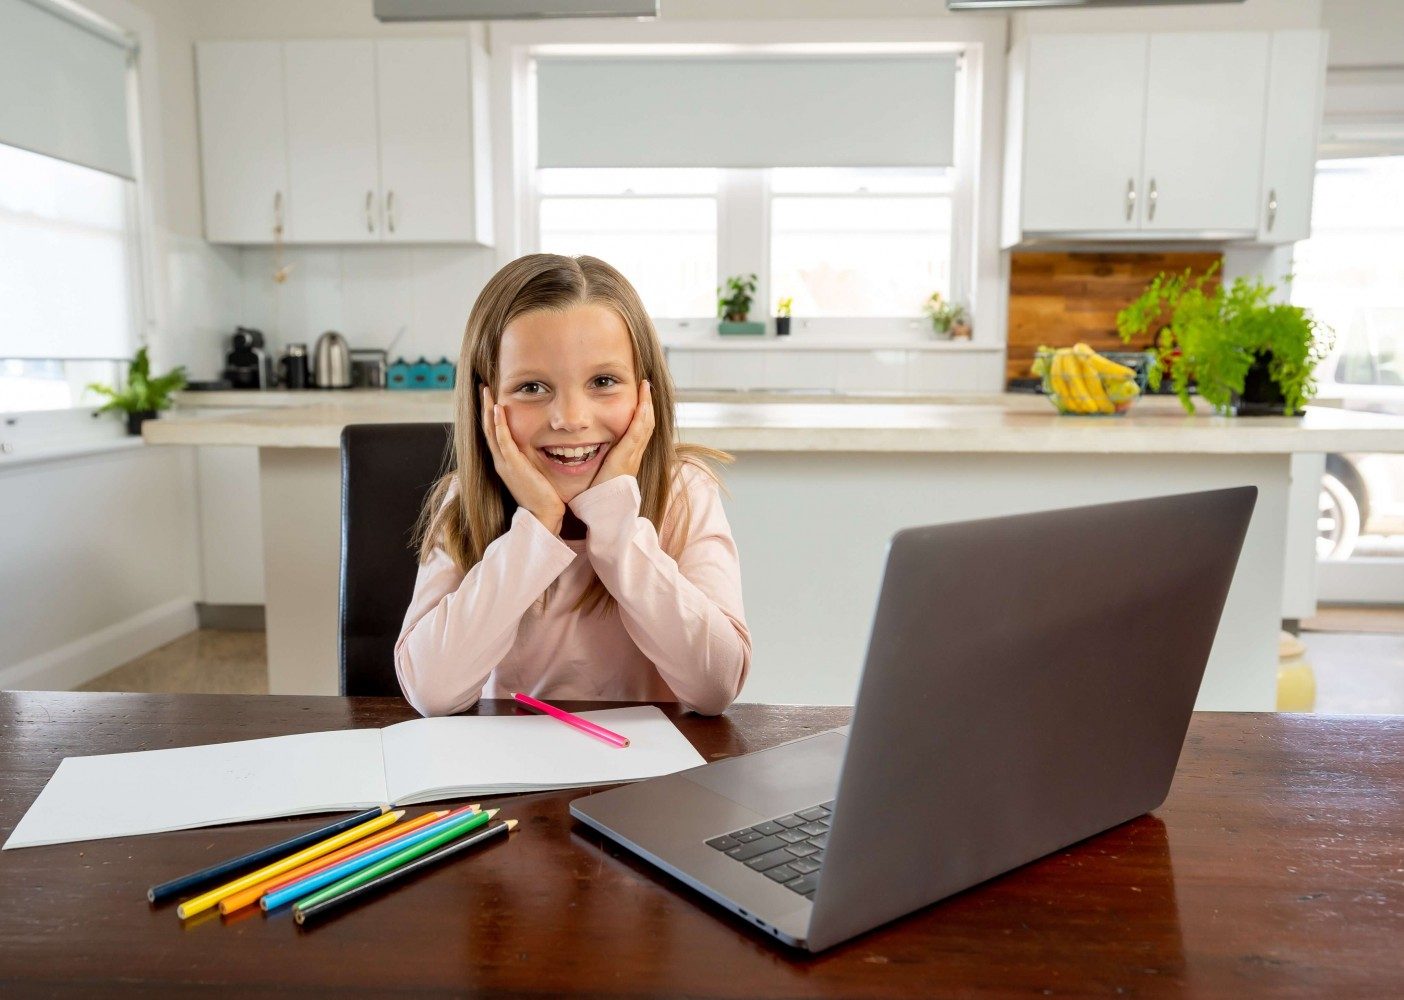 Learning Resources to Support At-Home Education